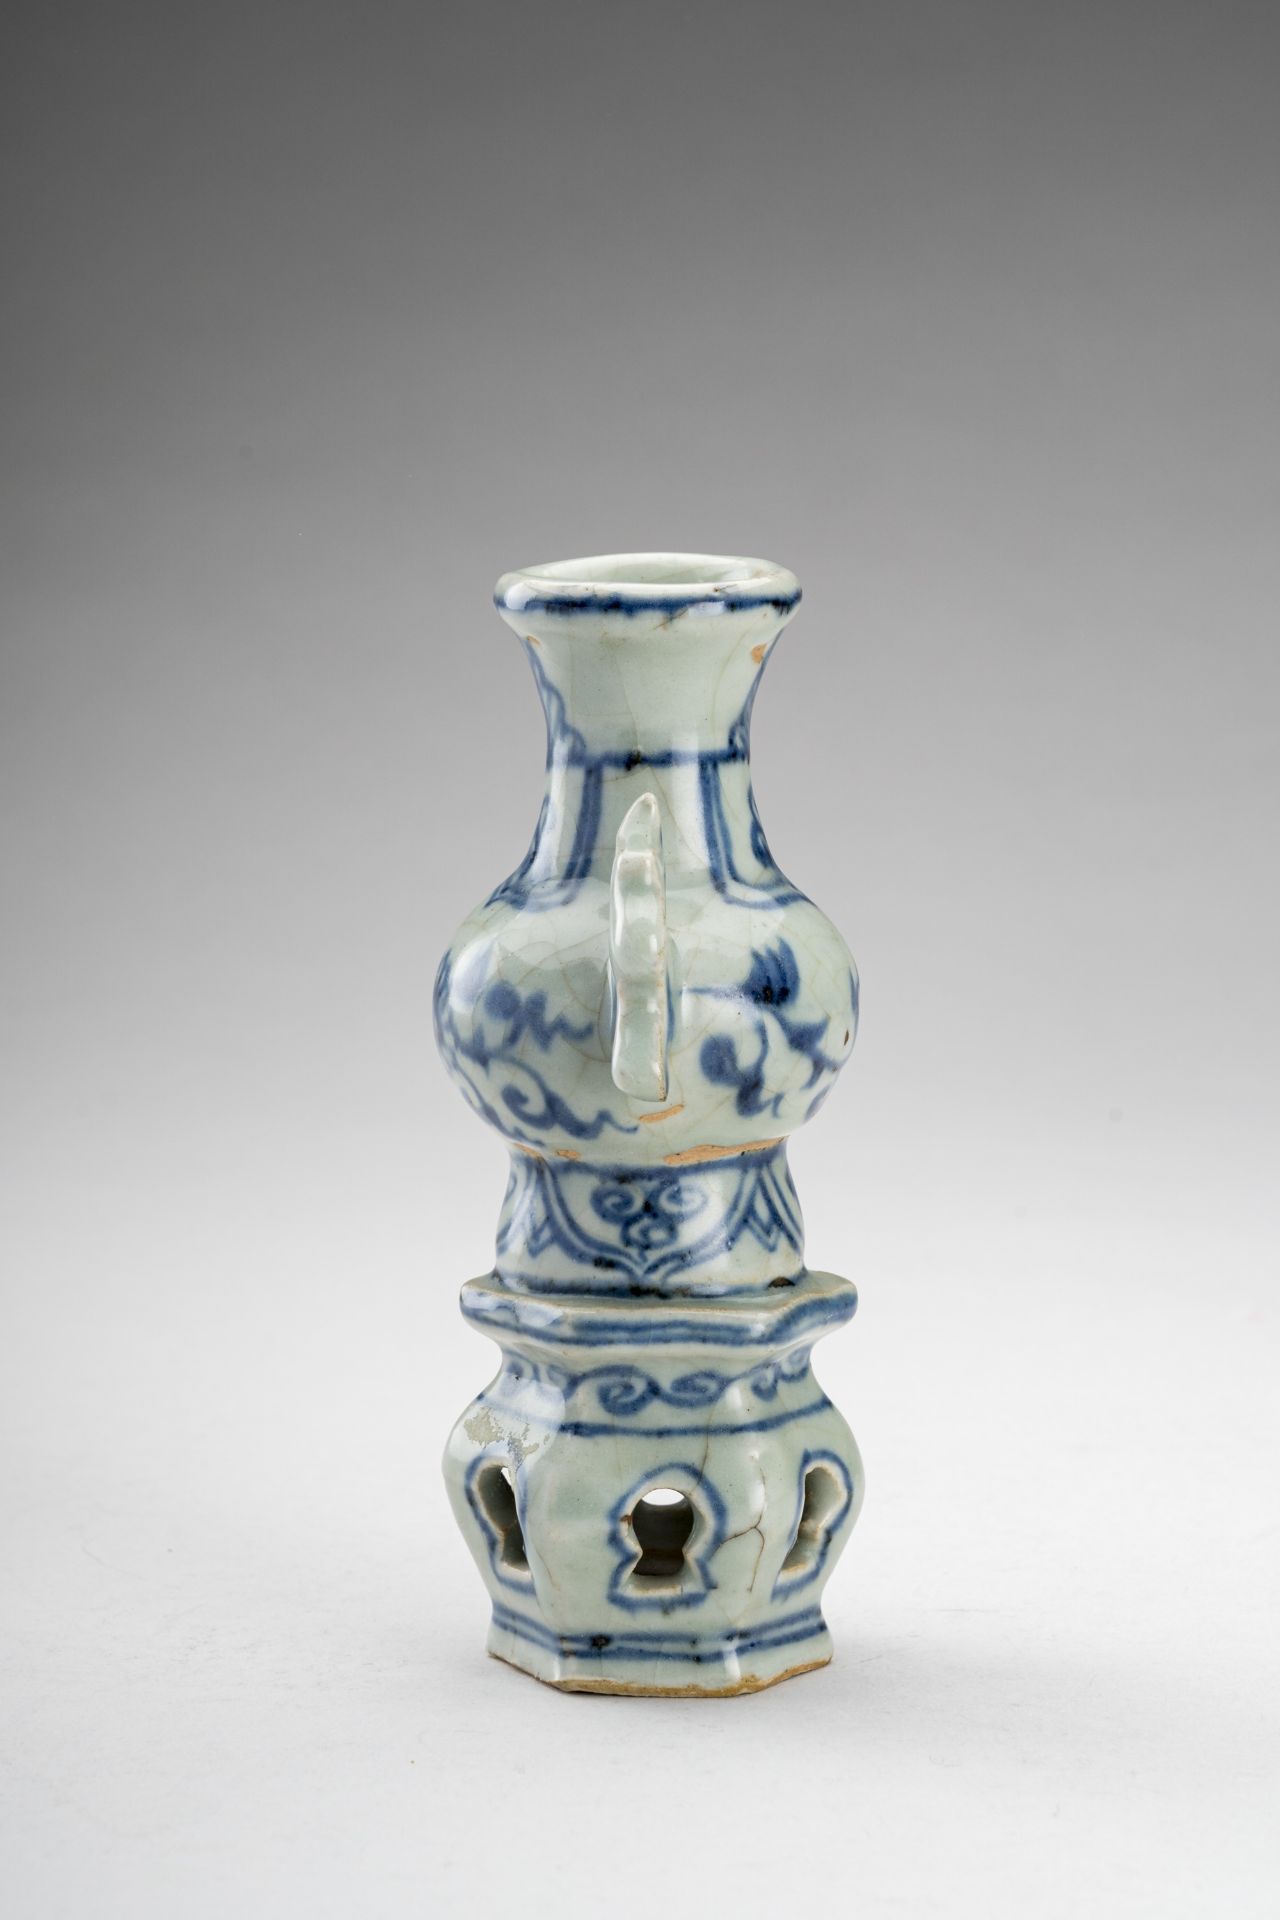 A SMALL BLUE AND WHITE PORCELAIN VASE - Image 4 of 7